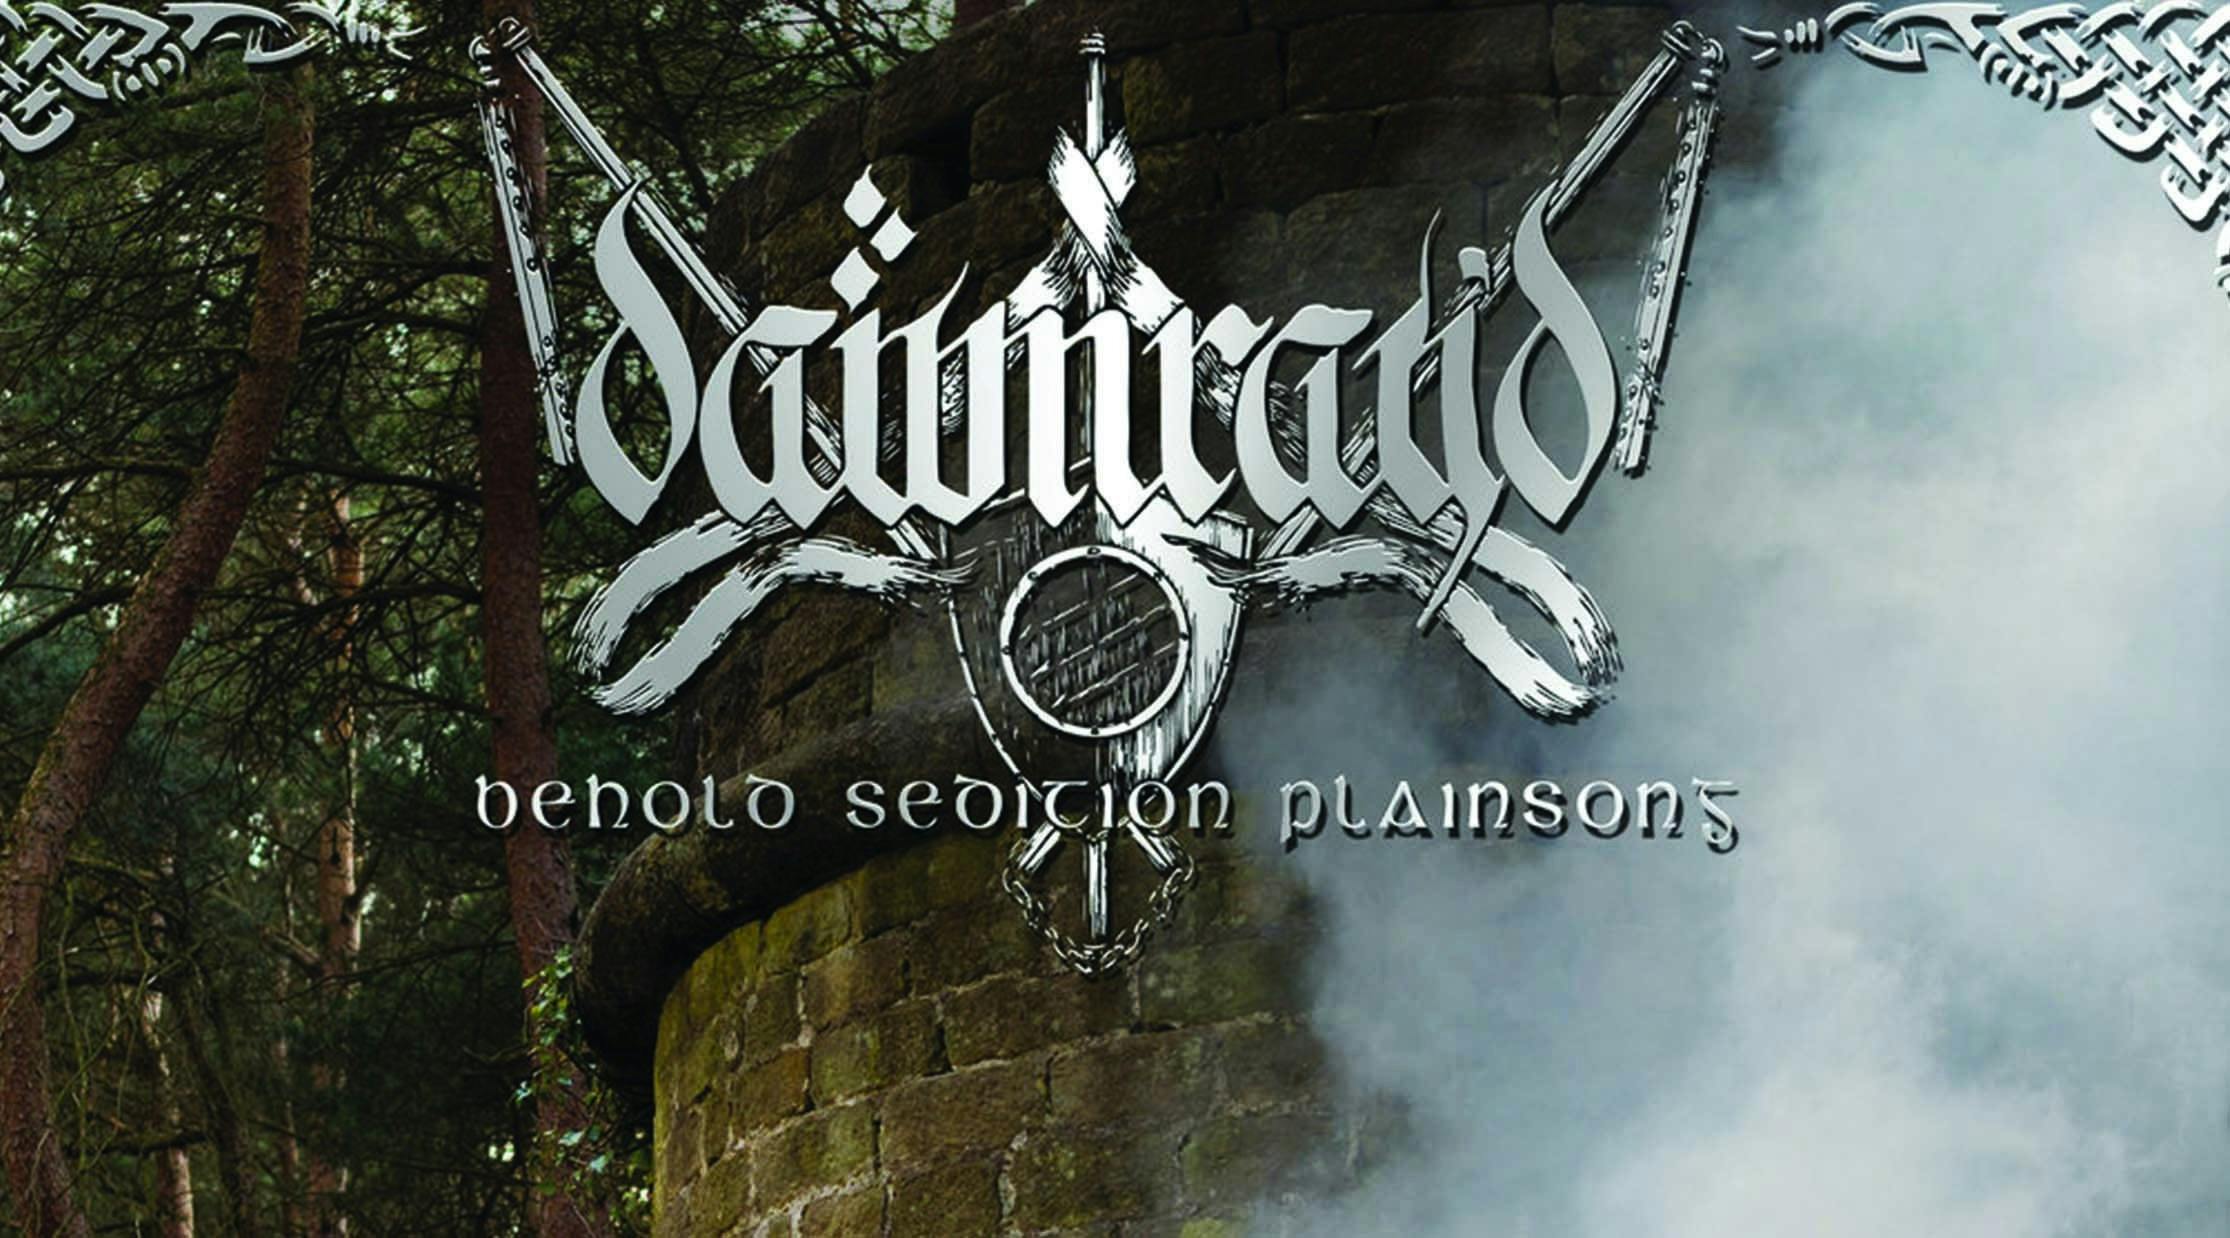 Album Review: Dawn Ray'd – Behold Sedition Plainsong